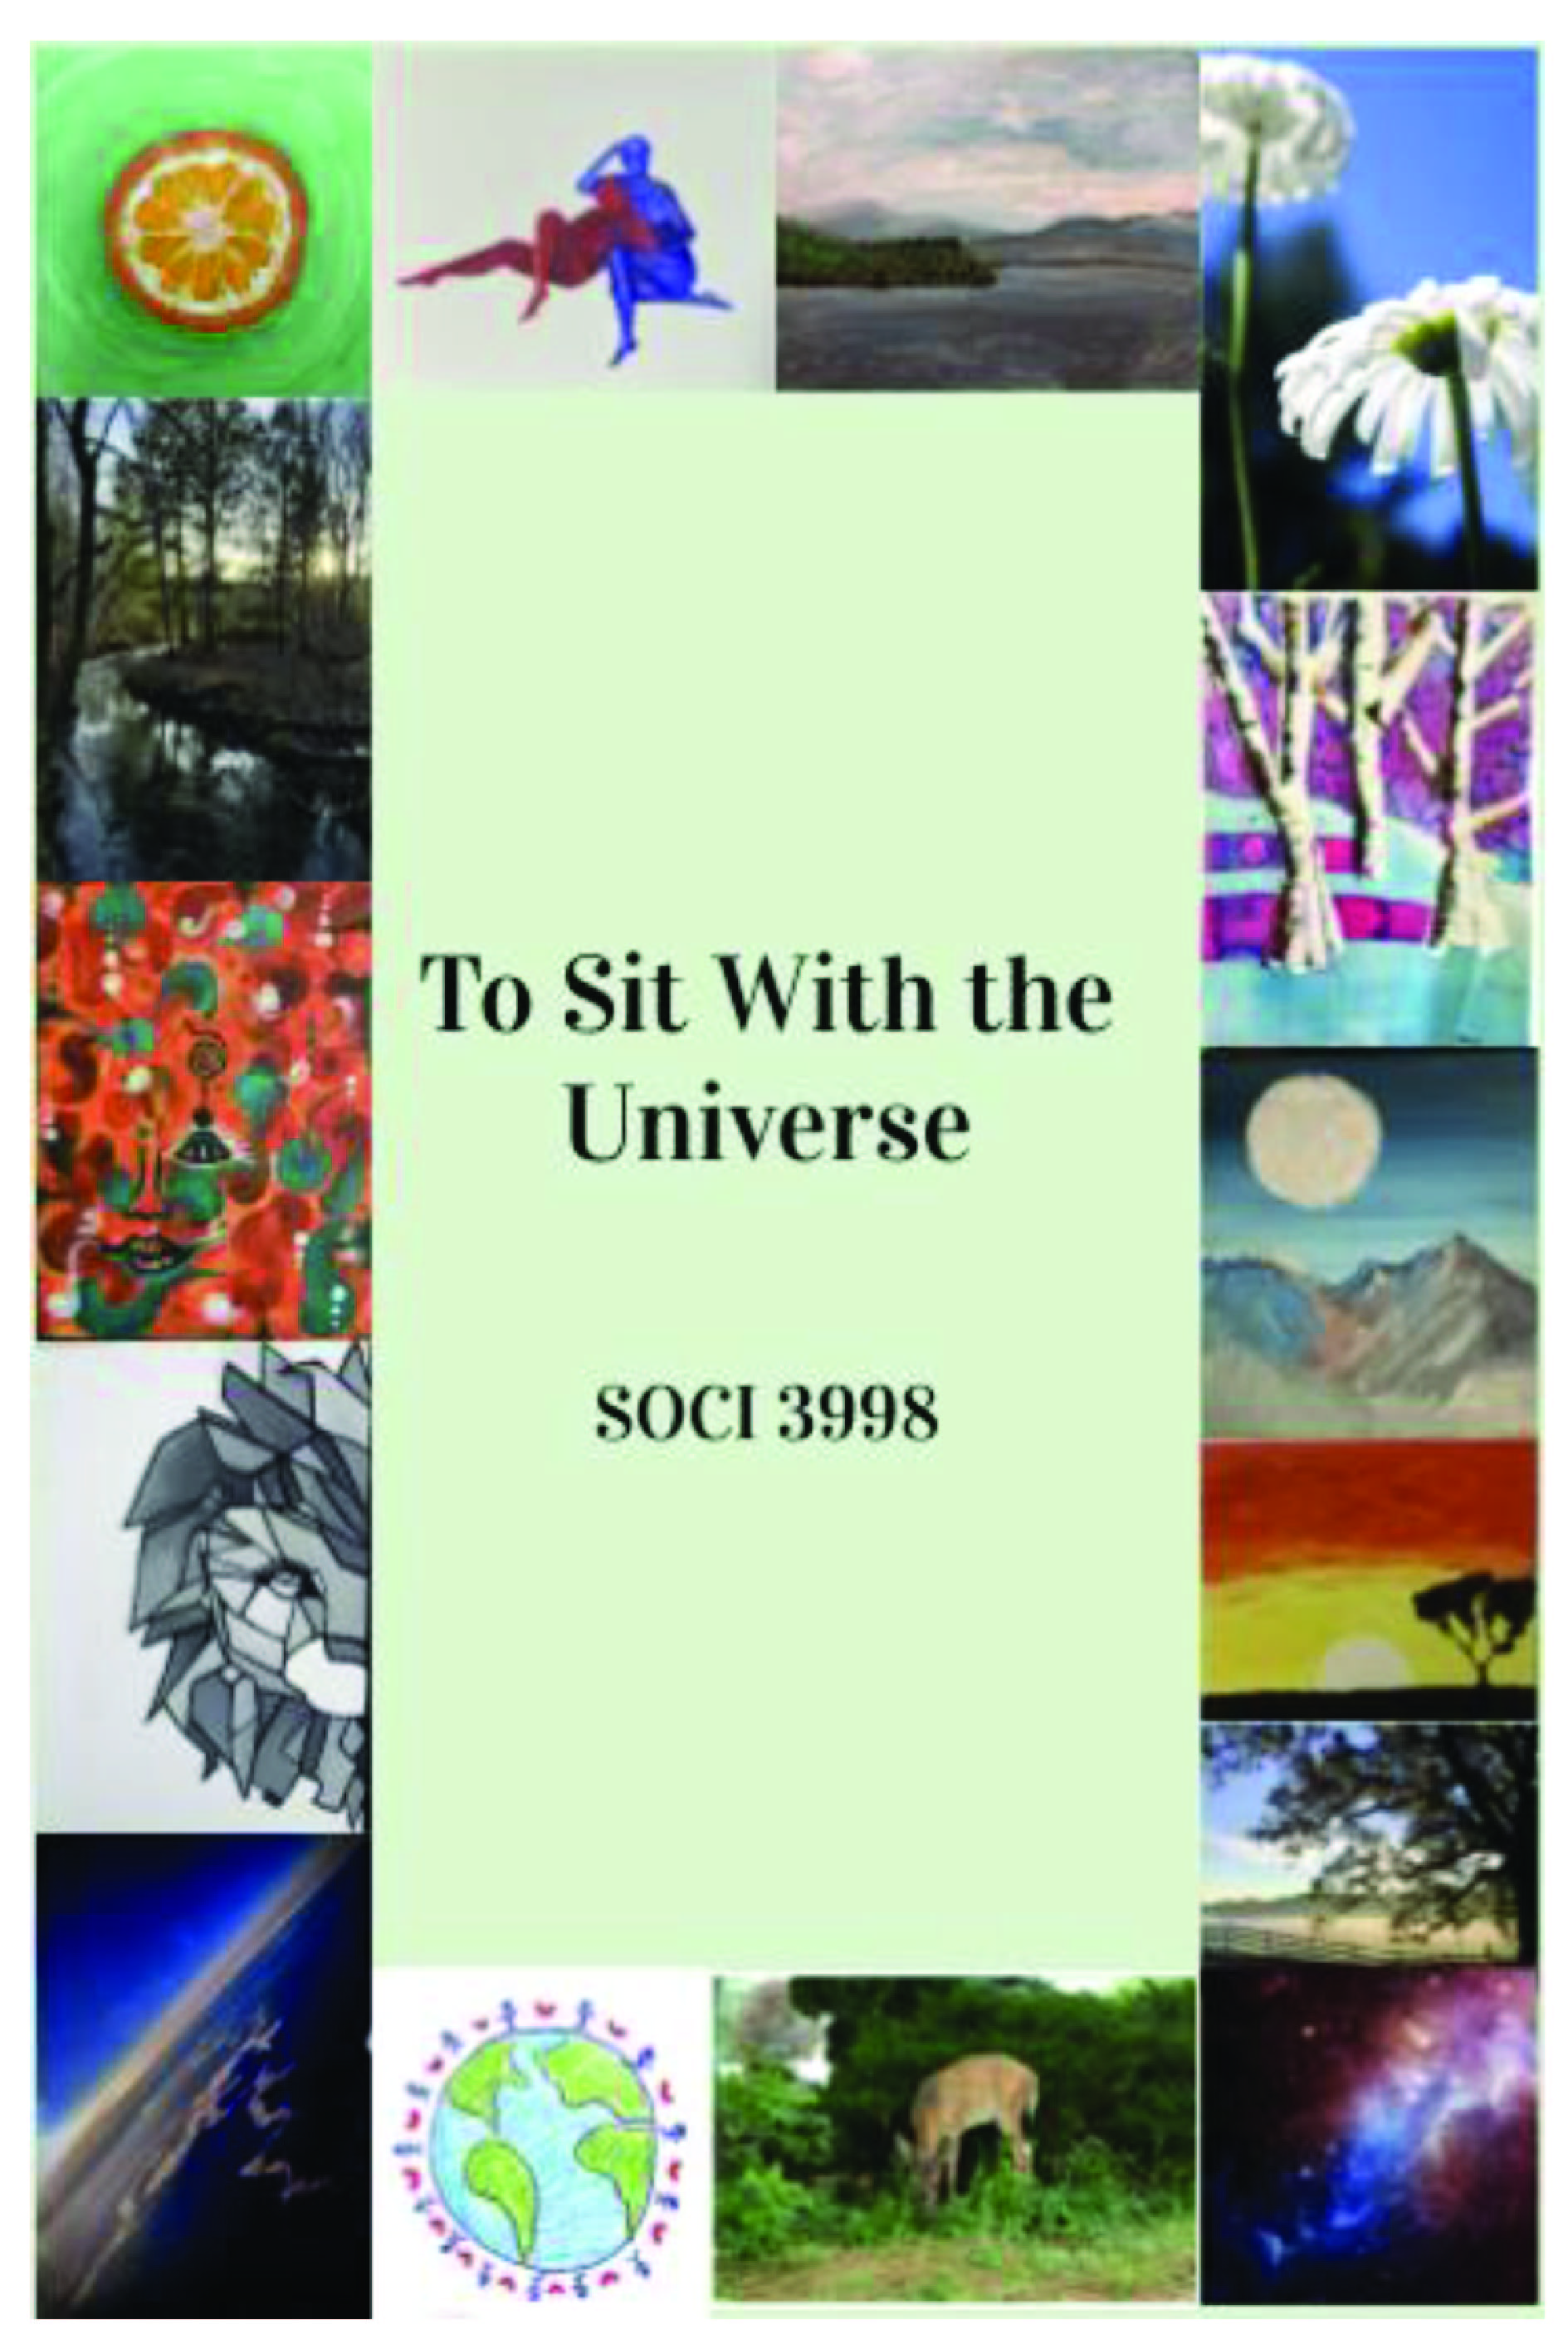 To Sit With the Universe